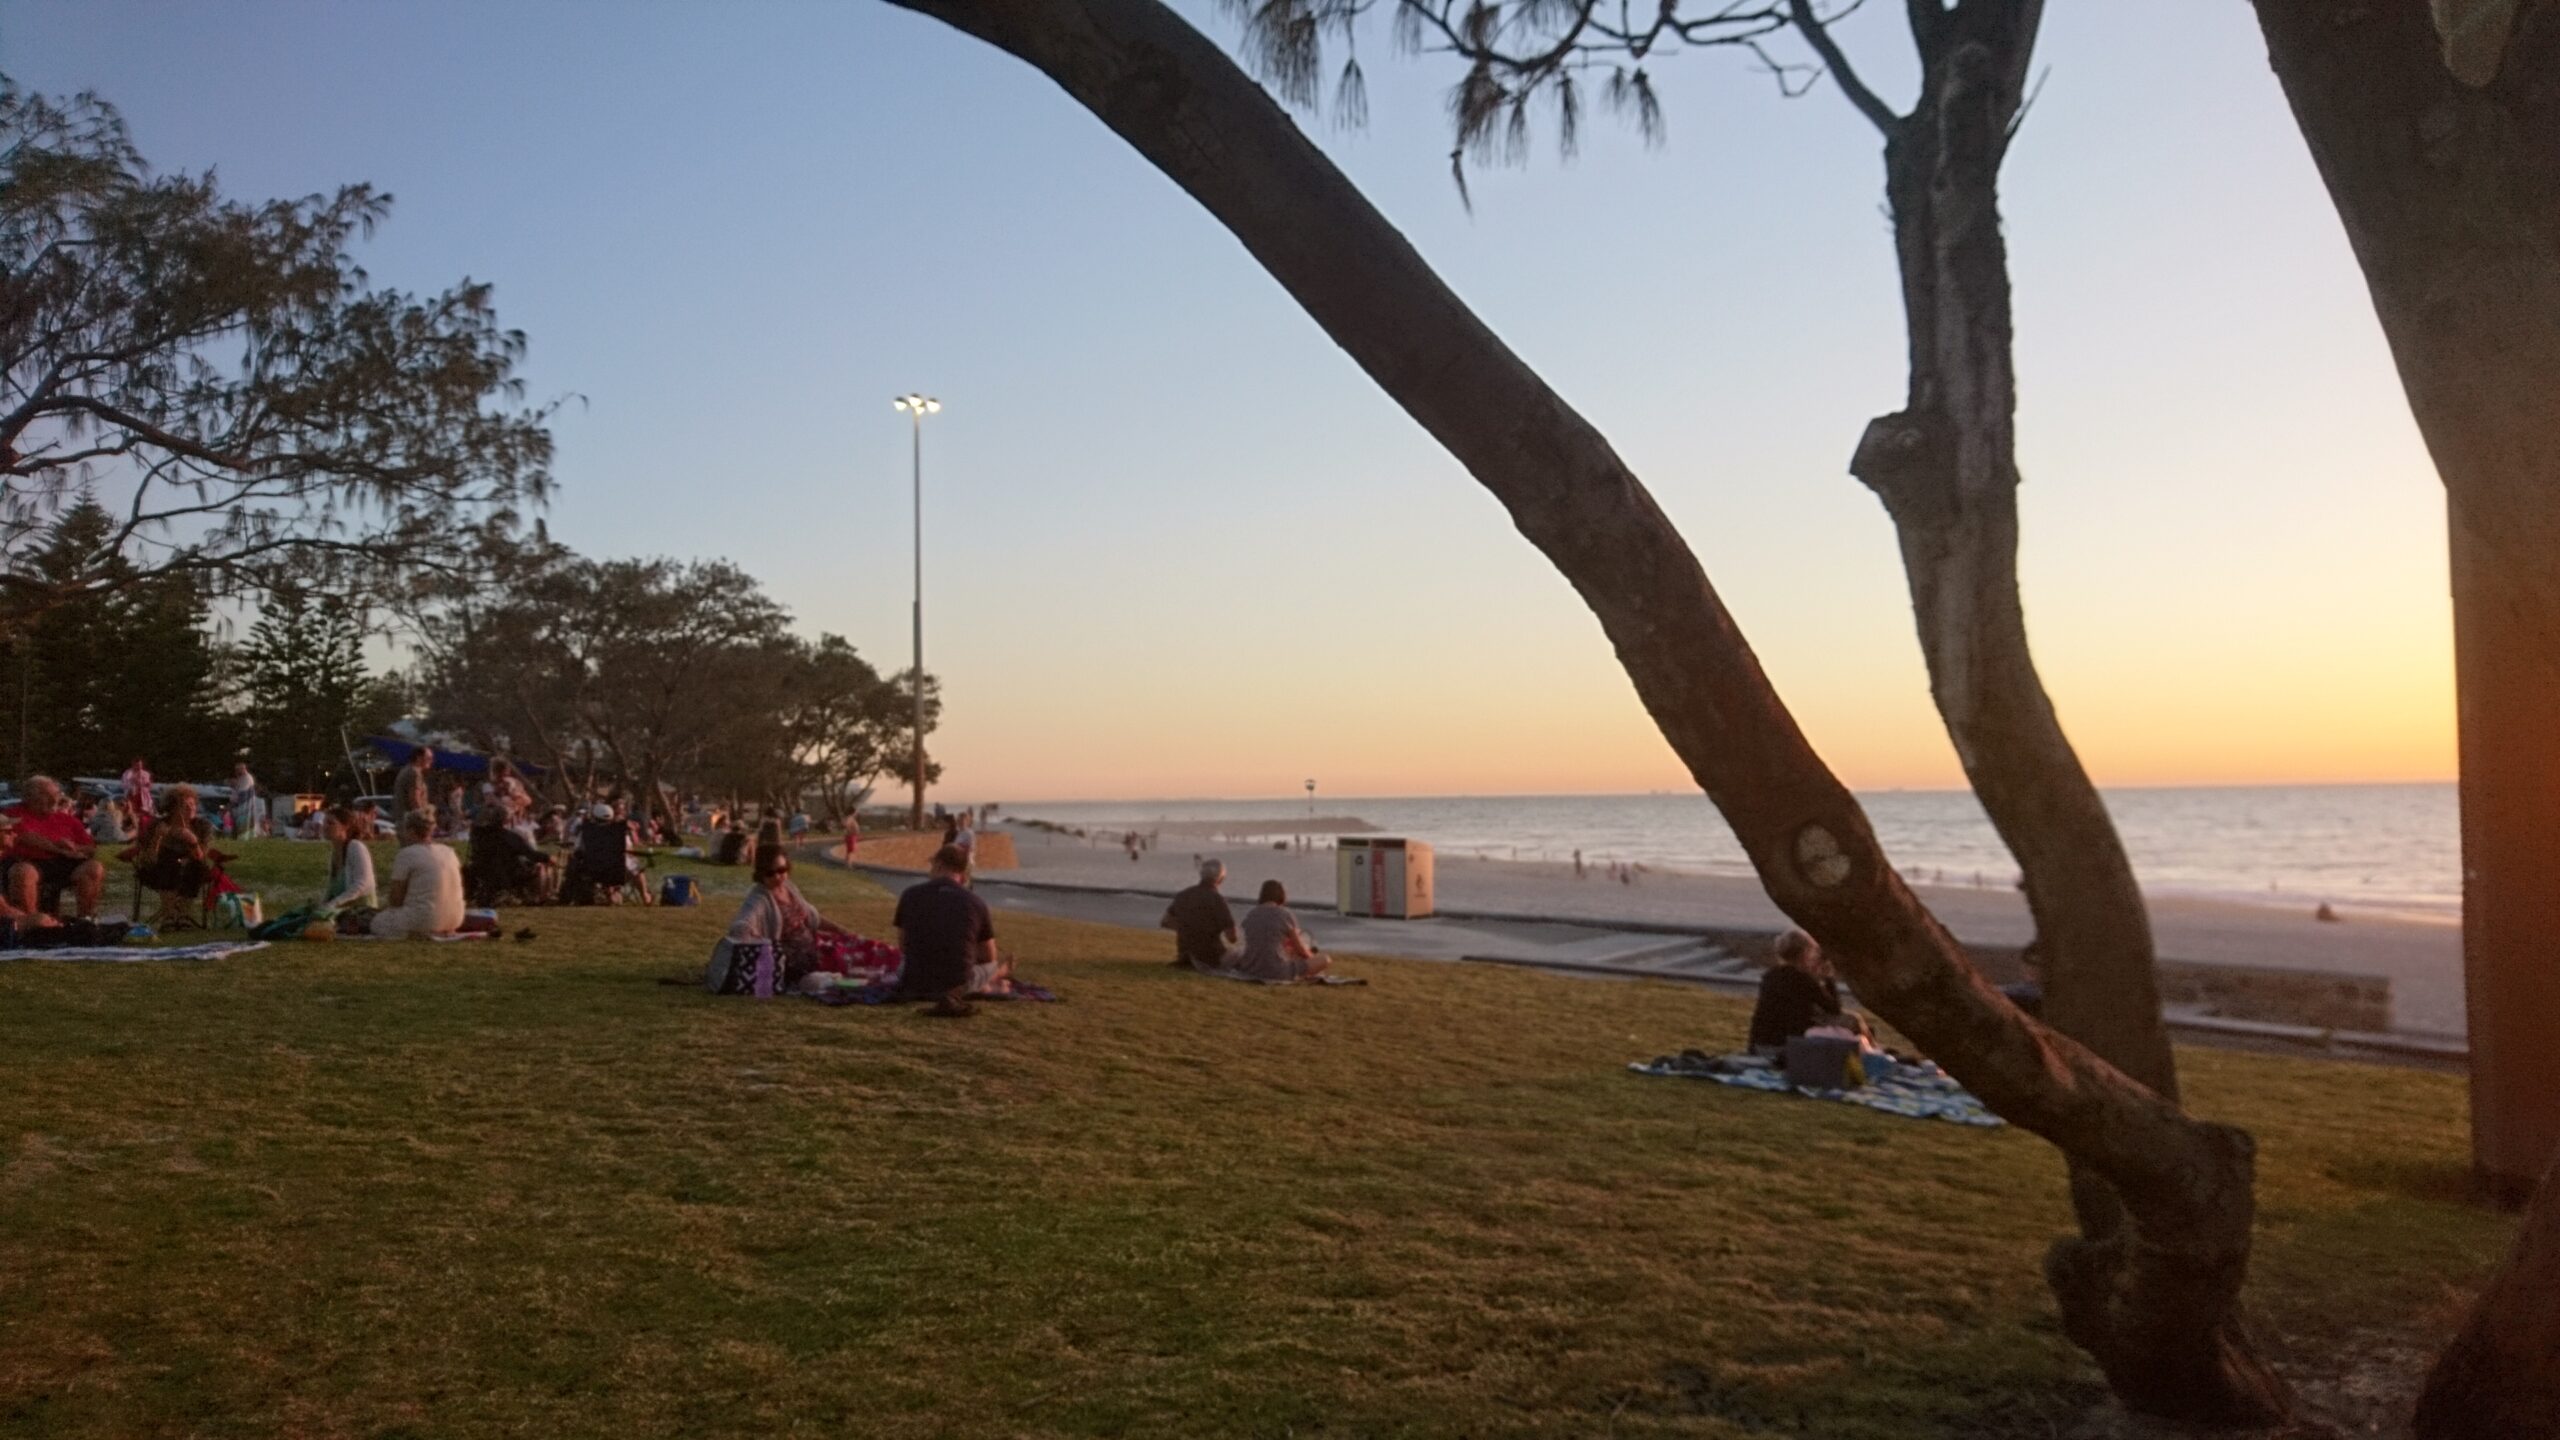 People watching the sun set at Cottesloe beach